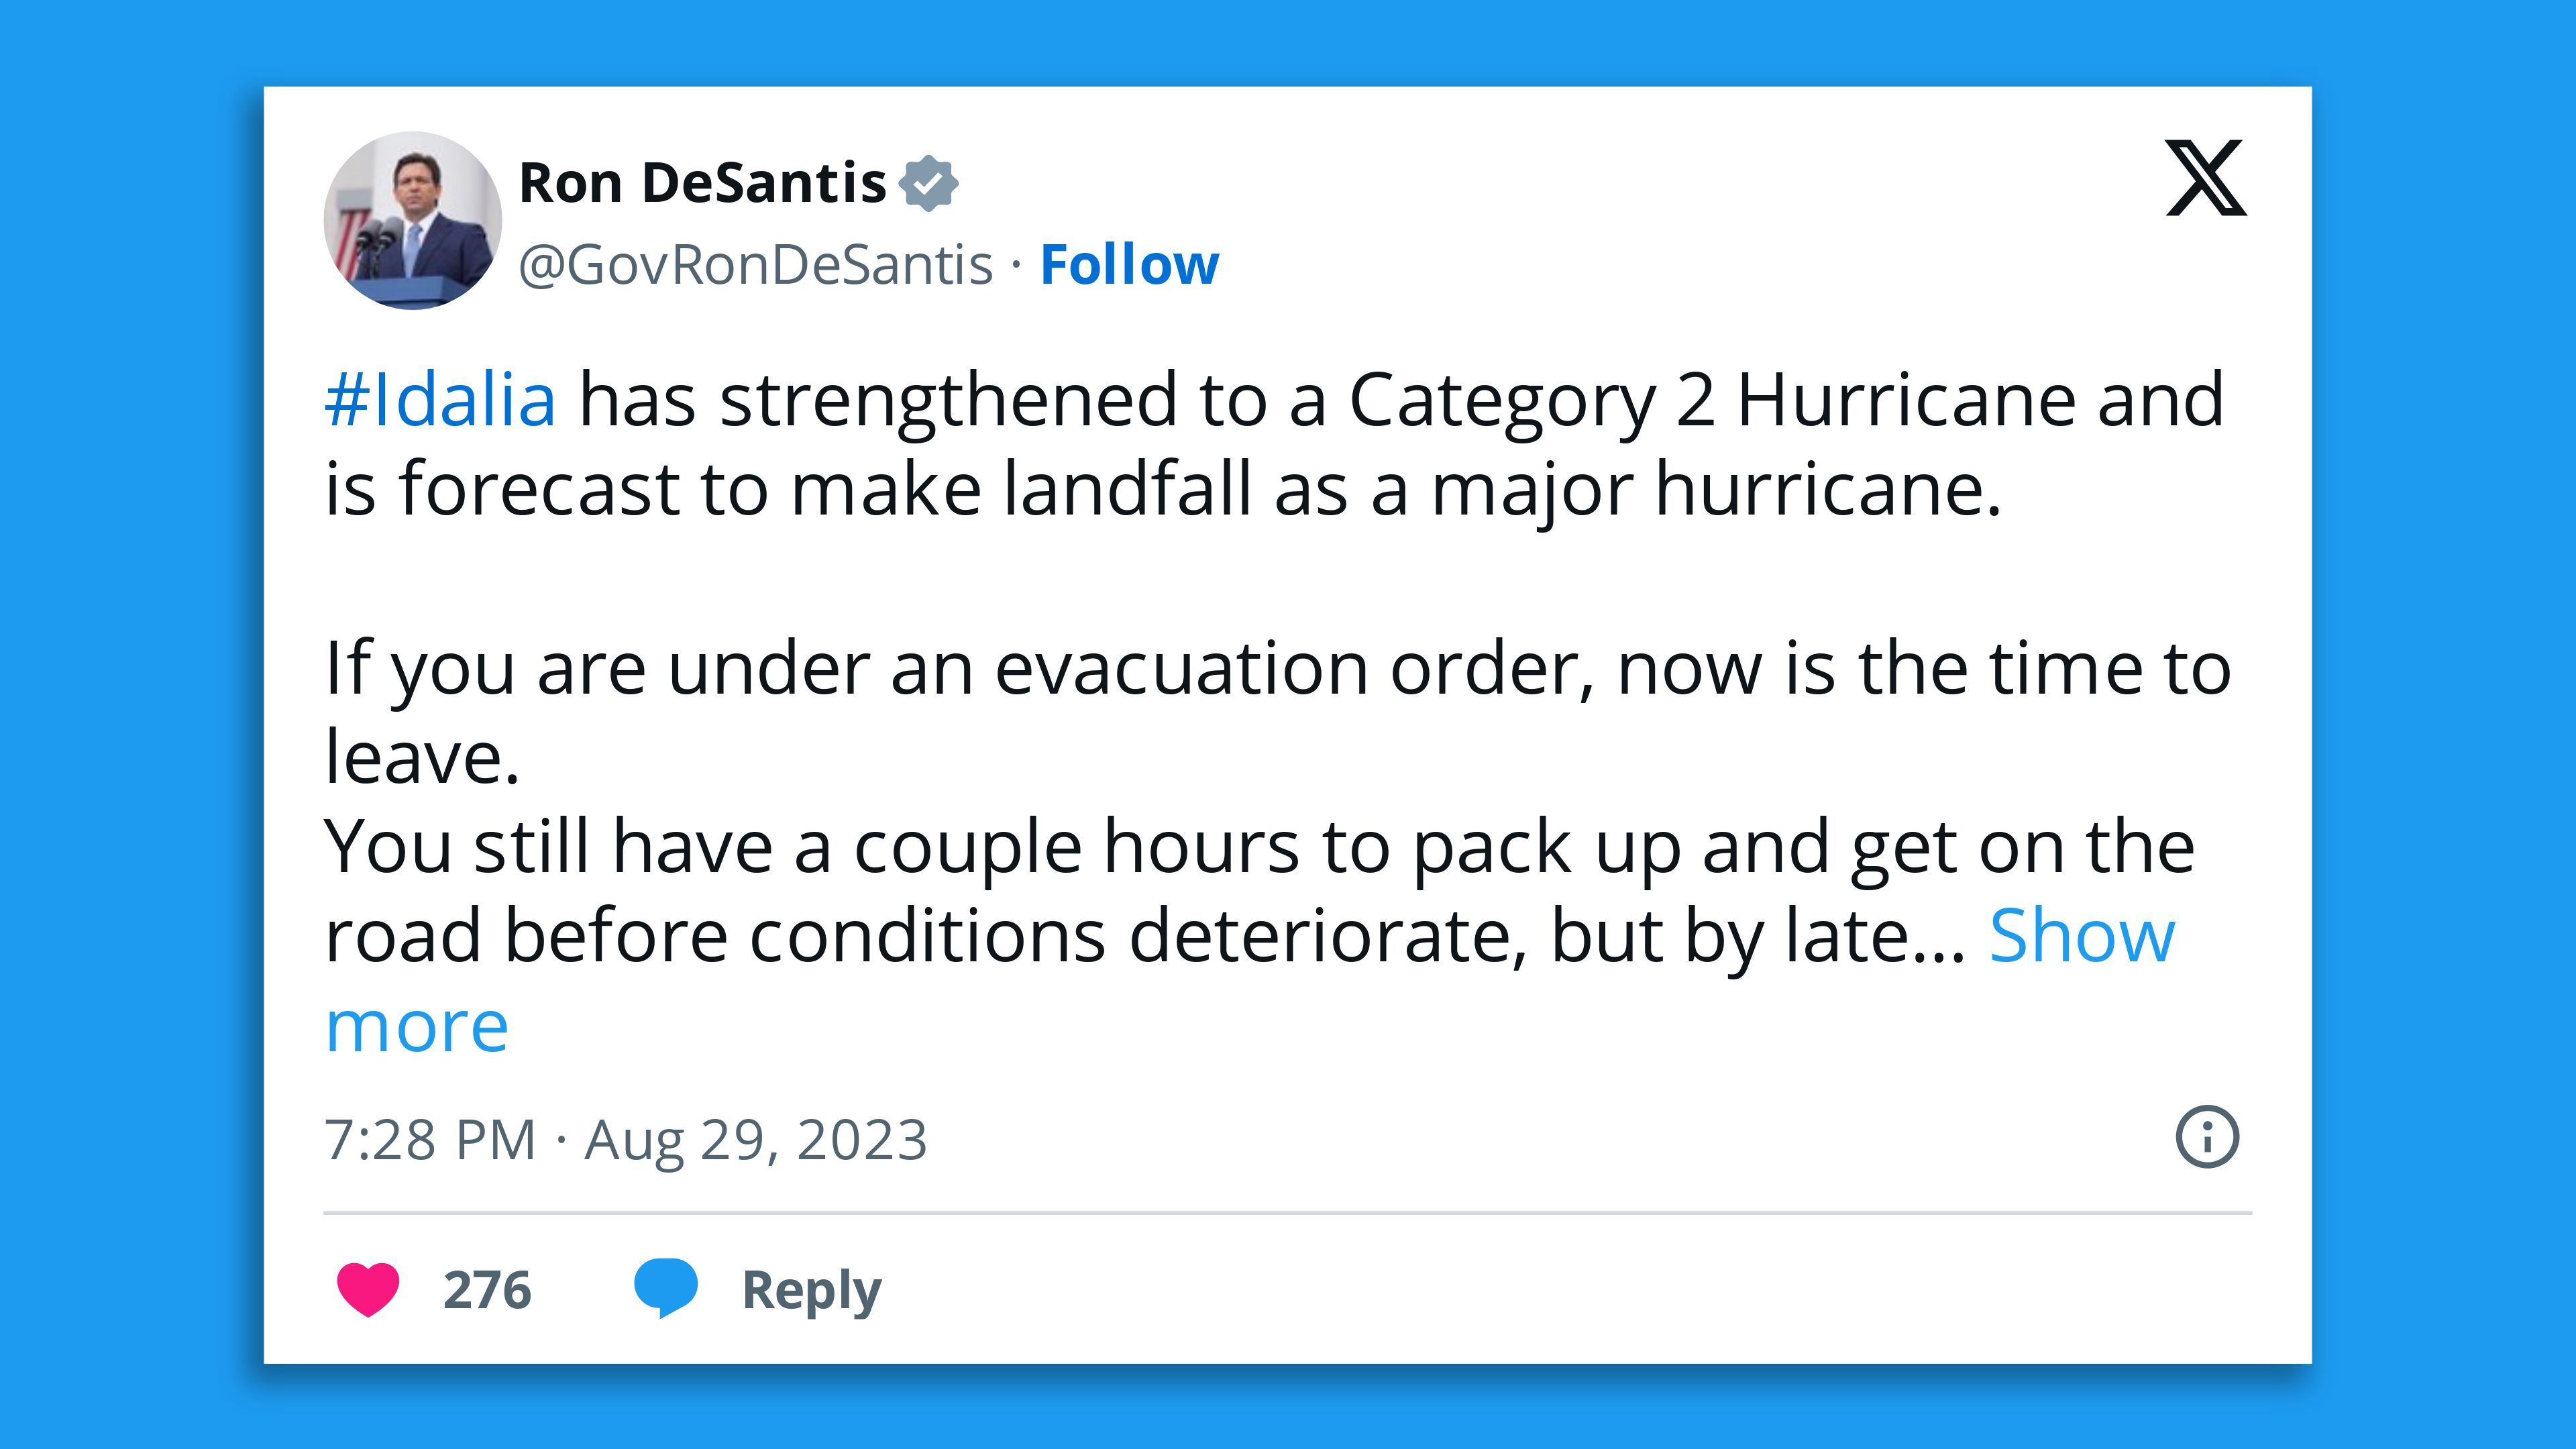 A screenshot of a tweet from Florida Gov. Ron DeSantis, saying: "#Idalia has strengthened to a Category 2 Hurricane and is forecast to make landfall as a major hurricane.   If you are under an evacuation order, now is the time to leave. You still have a couple hours to pack up and get on the road before conditions deteriorate, but by late tonight you will need to hunker down and stay in place.   If you choose to stay, first responders will not be able to get to you until after the storm has passed."